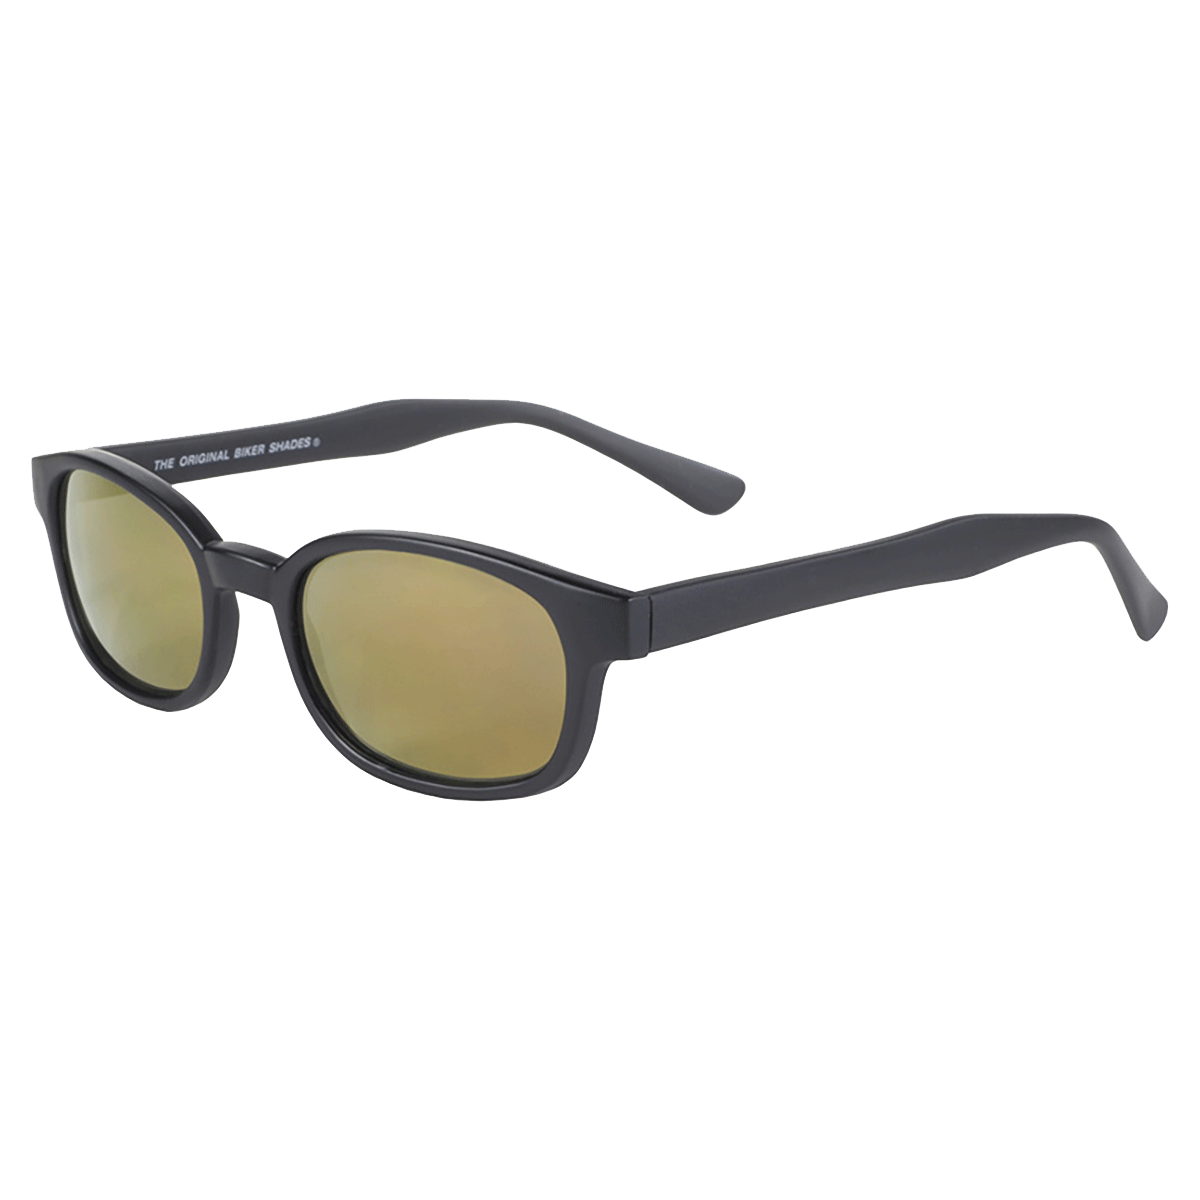 X-KD's 1000 sunglasses - Gold mirror and matte black frame